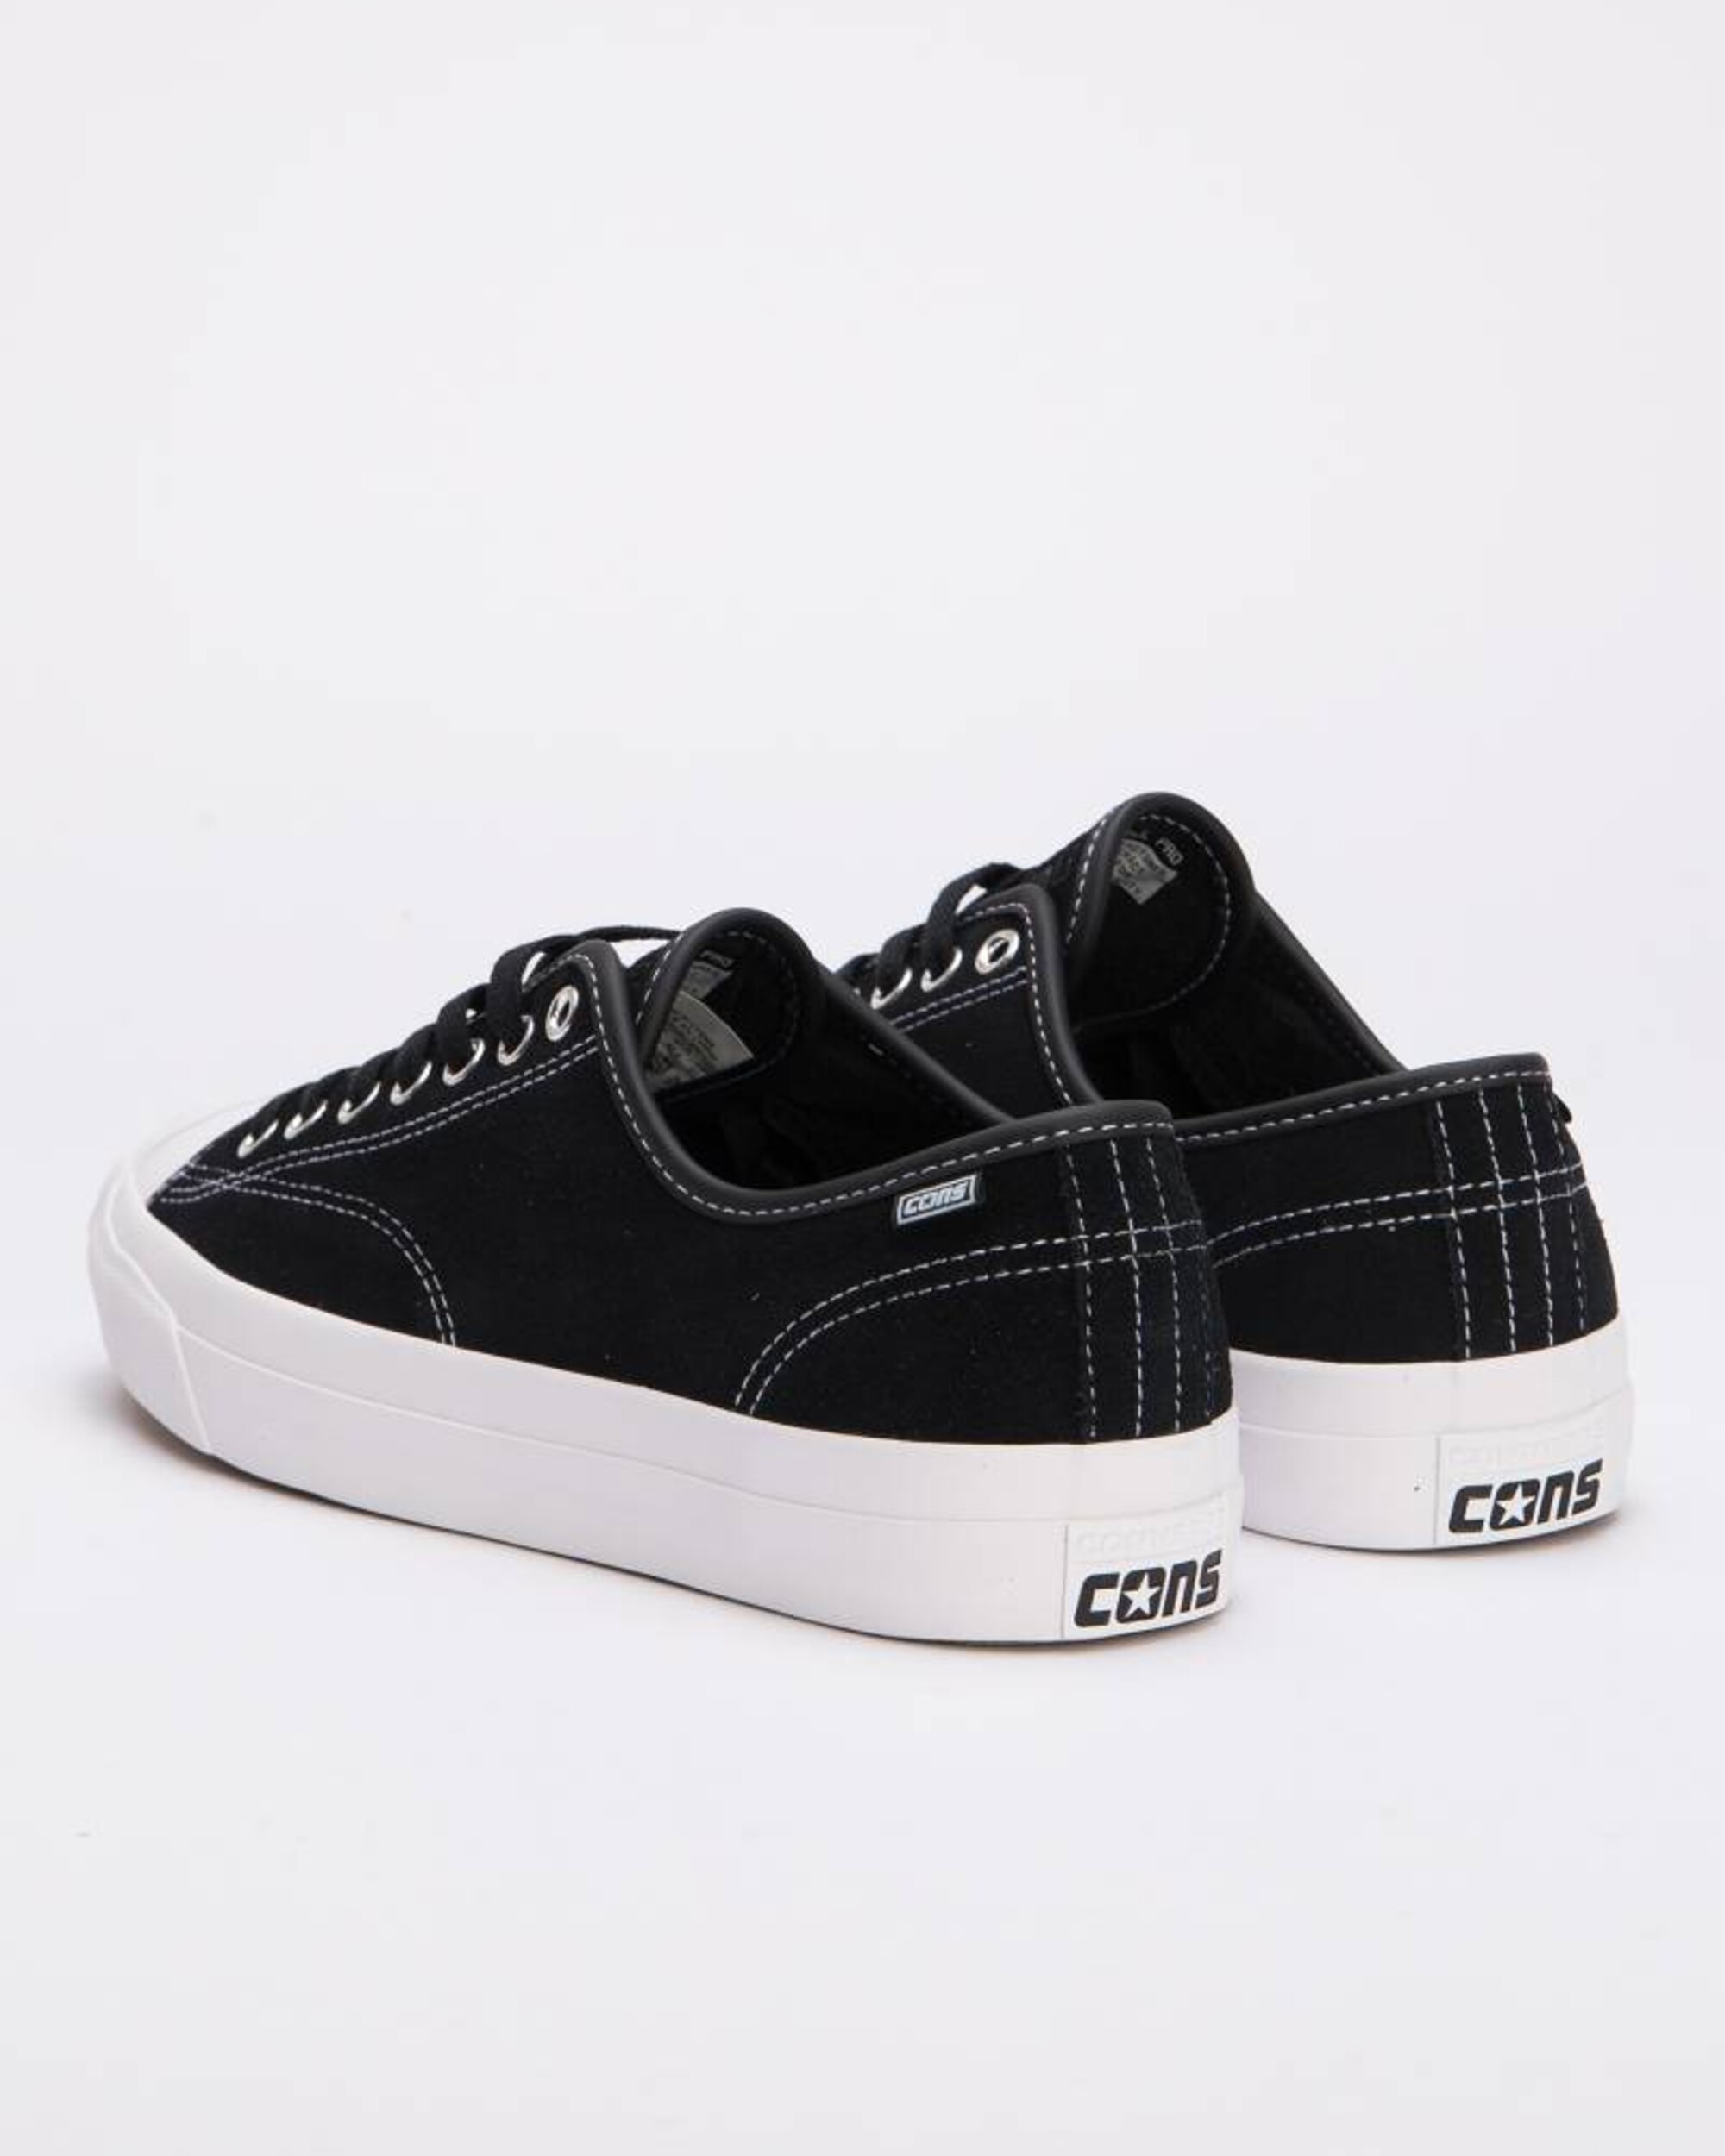 Converse Jack Purcell Pro OX Black/White